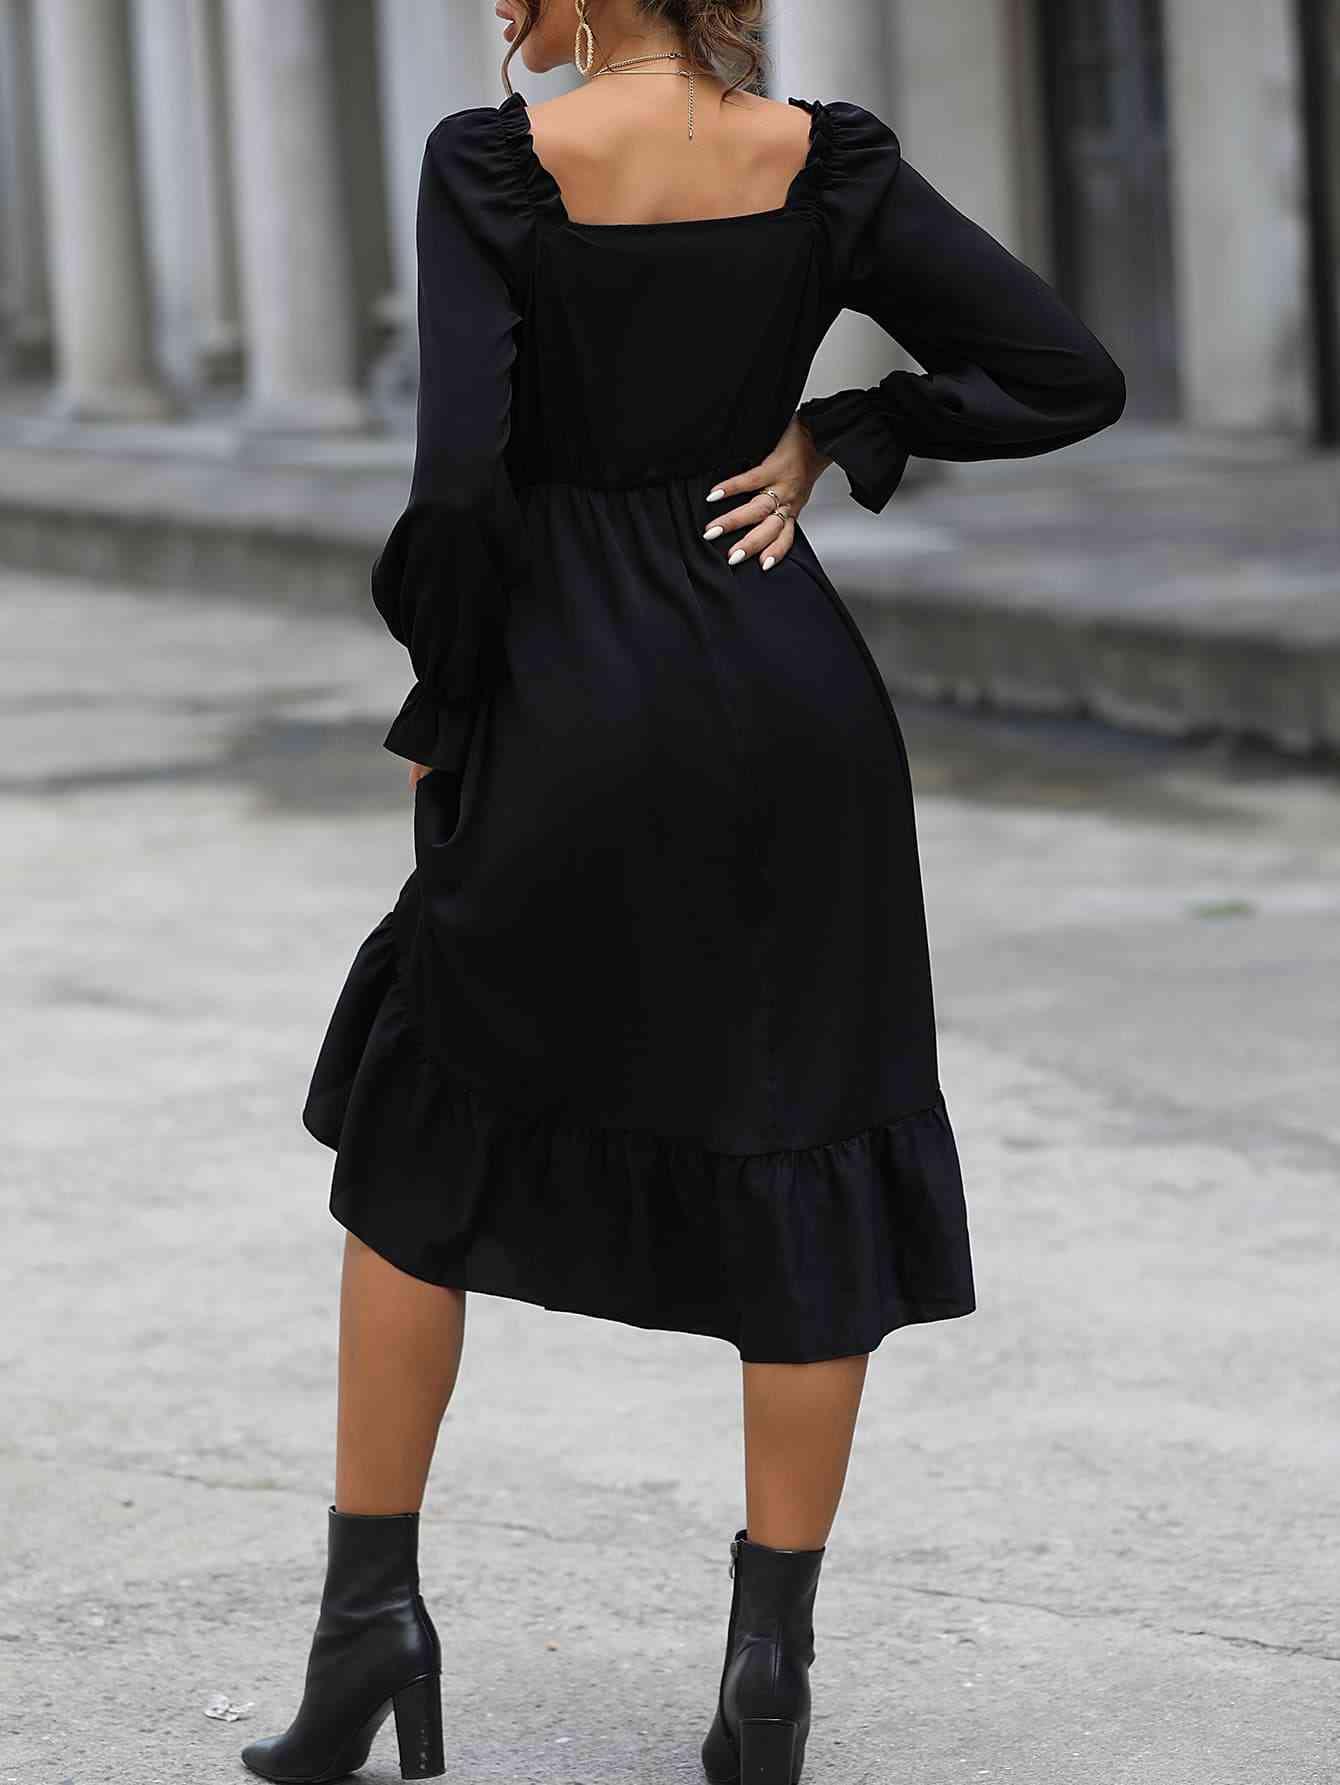 a woman wearing a black dress and boots